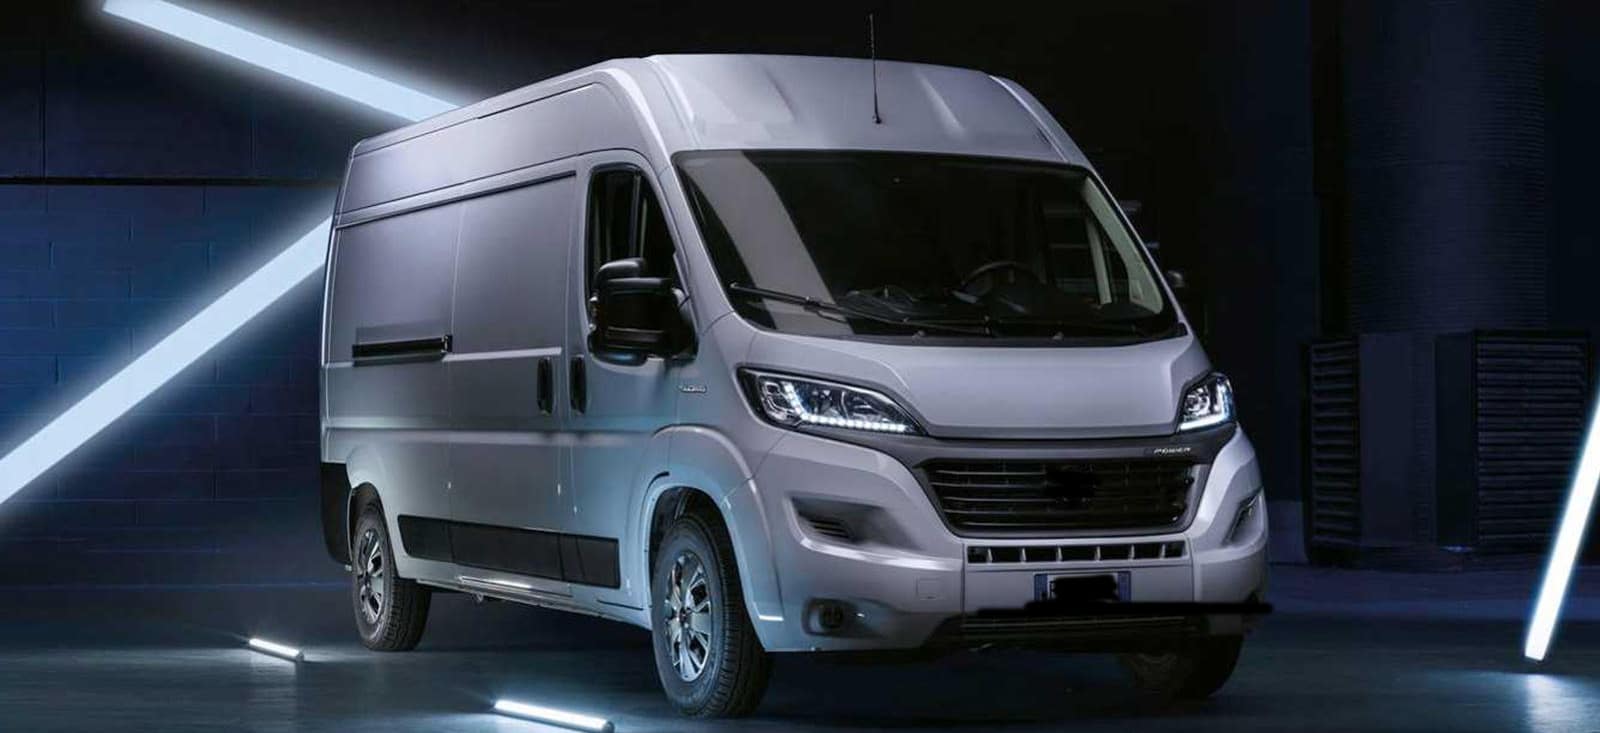 What Will the Future Hold For the Ram ProMaster? | Kendall Dodge Chrysler  Jeep Ram What Will the Future Hold For the Ram ProMaster?